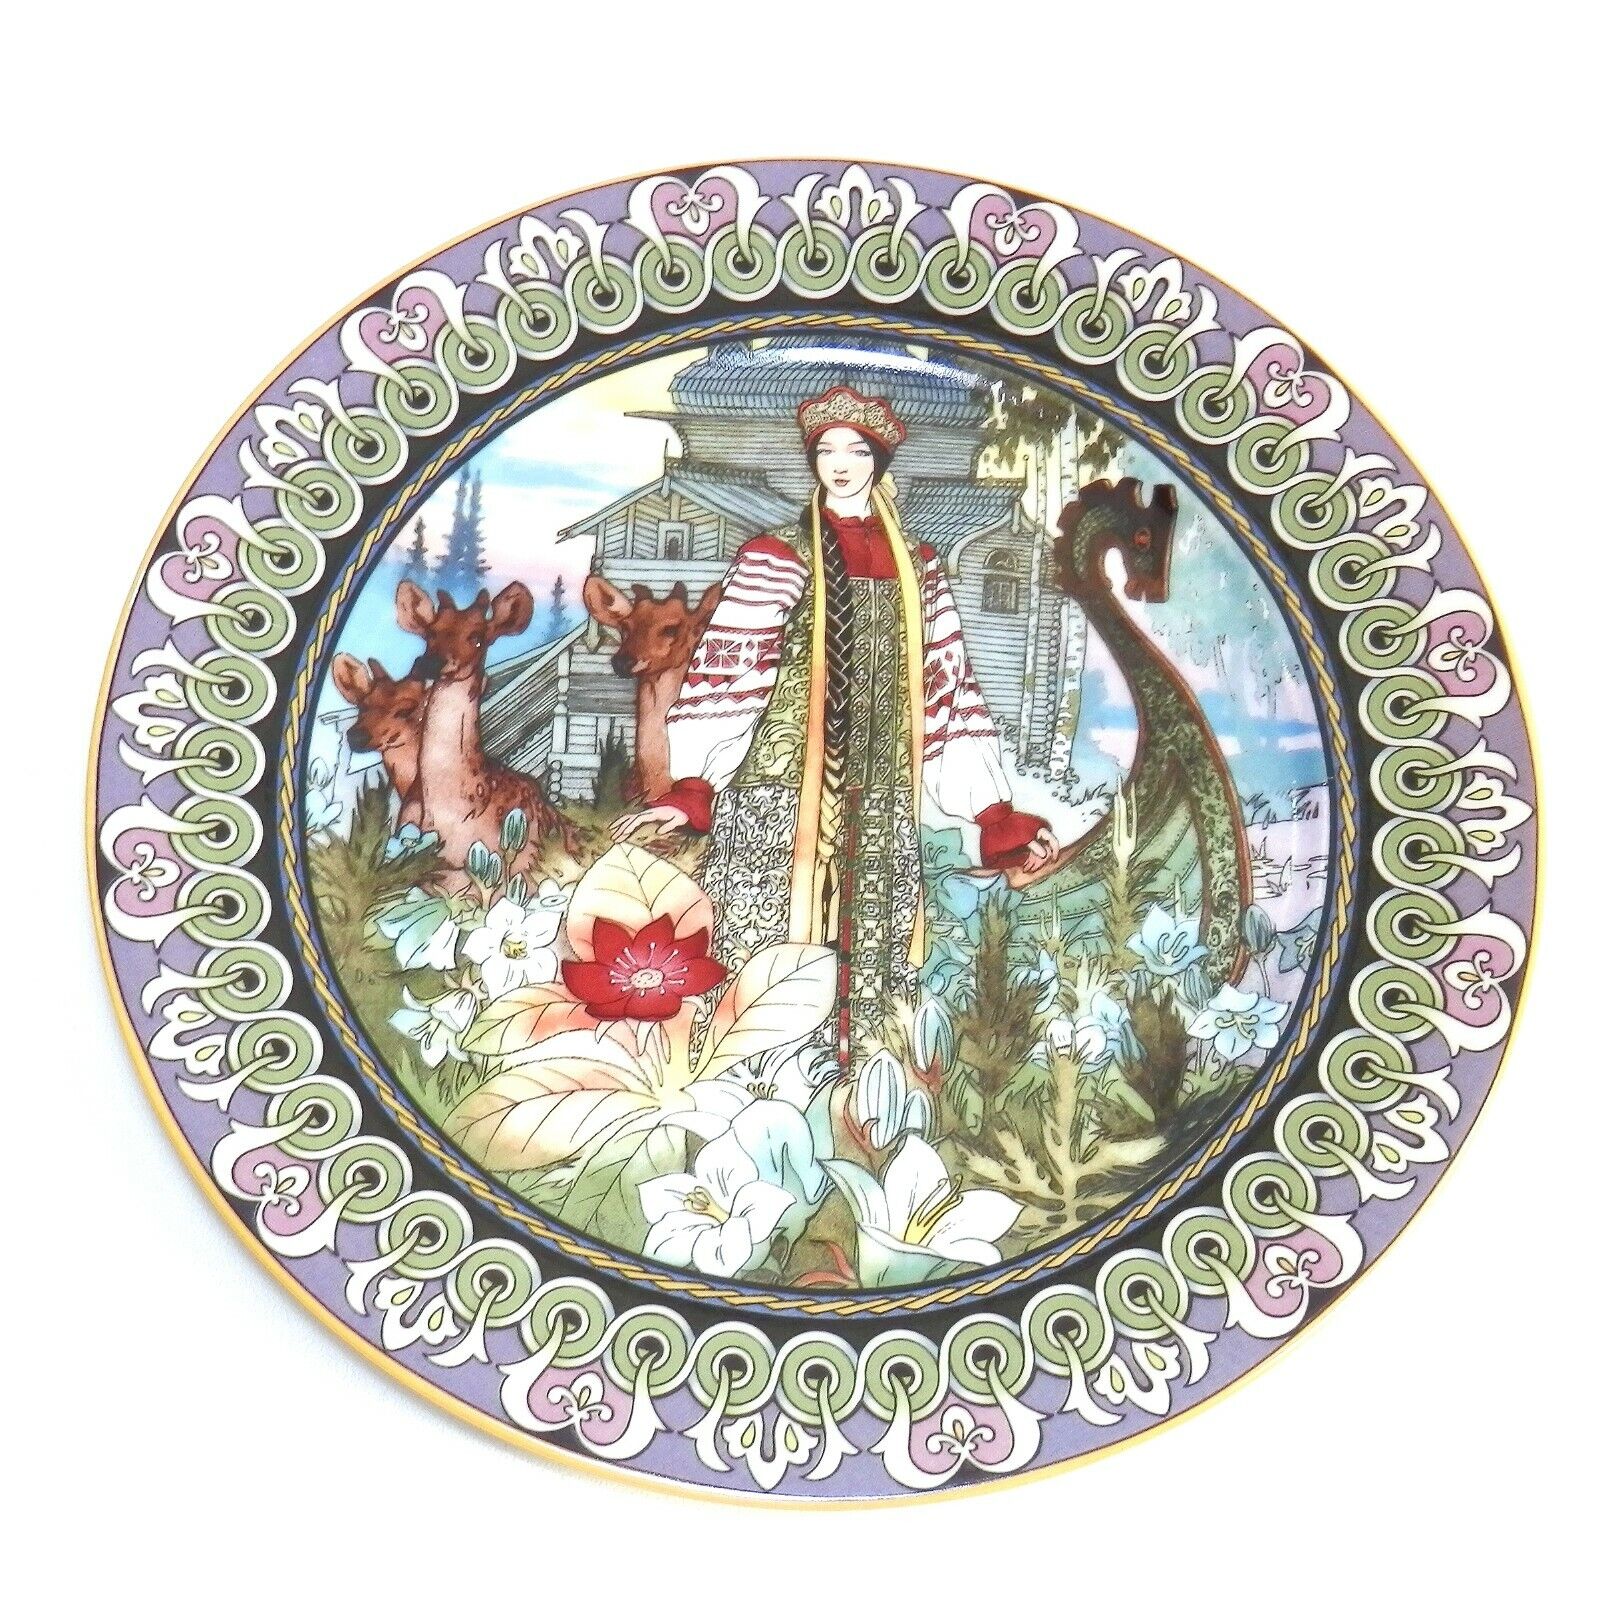 Byliny Porcelain THE ENCHANTED GARDEN Scarlet Flower Russian Collectors Plate